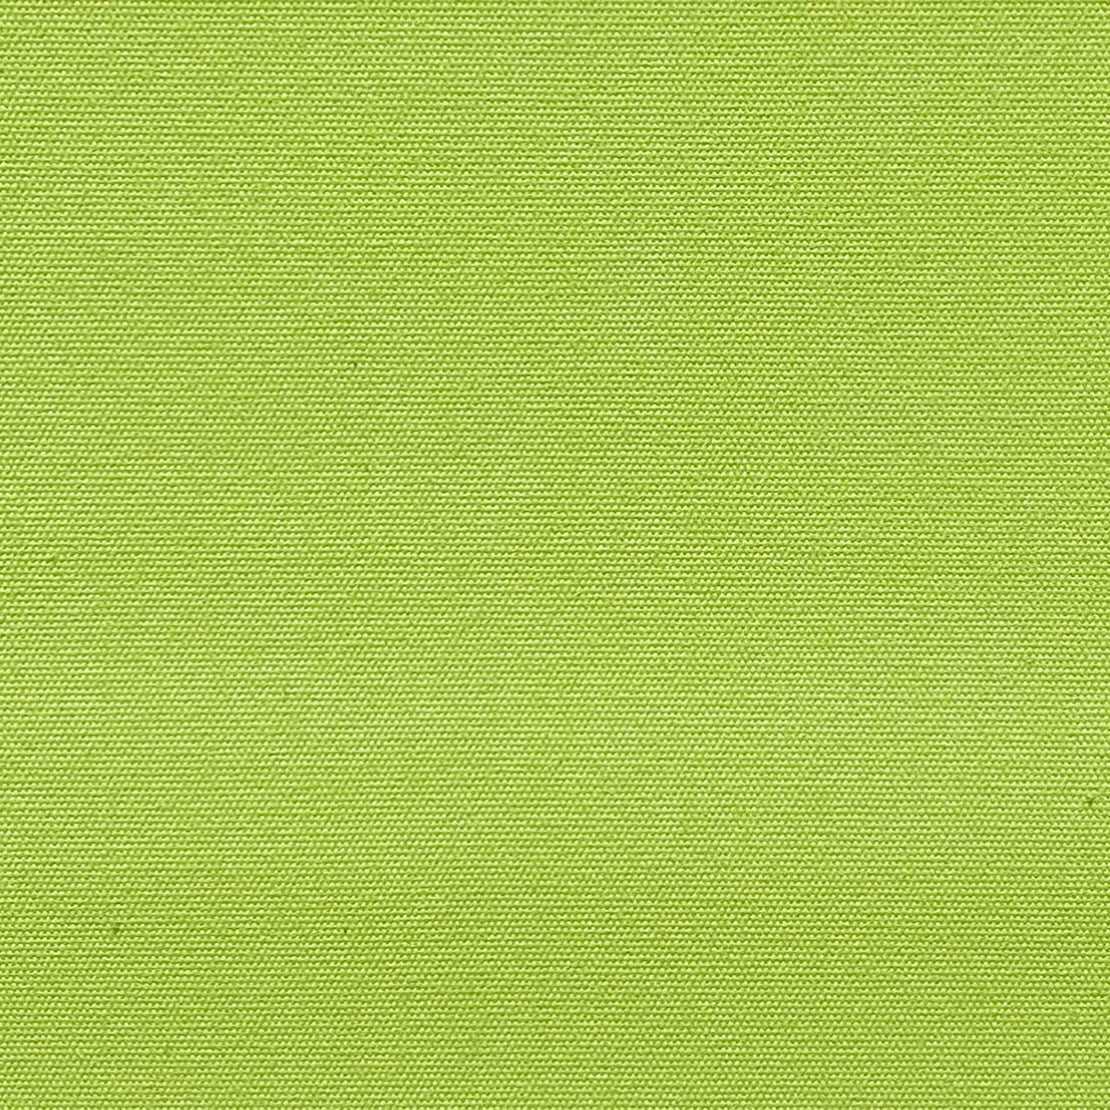 Jayco Canvas: Lime Green (Grey Backing)